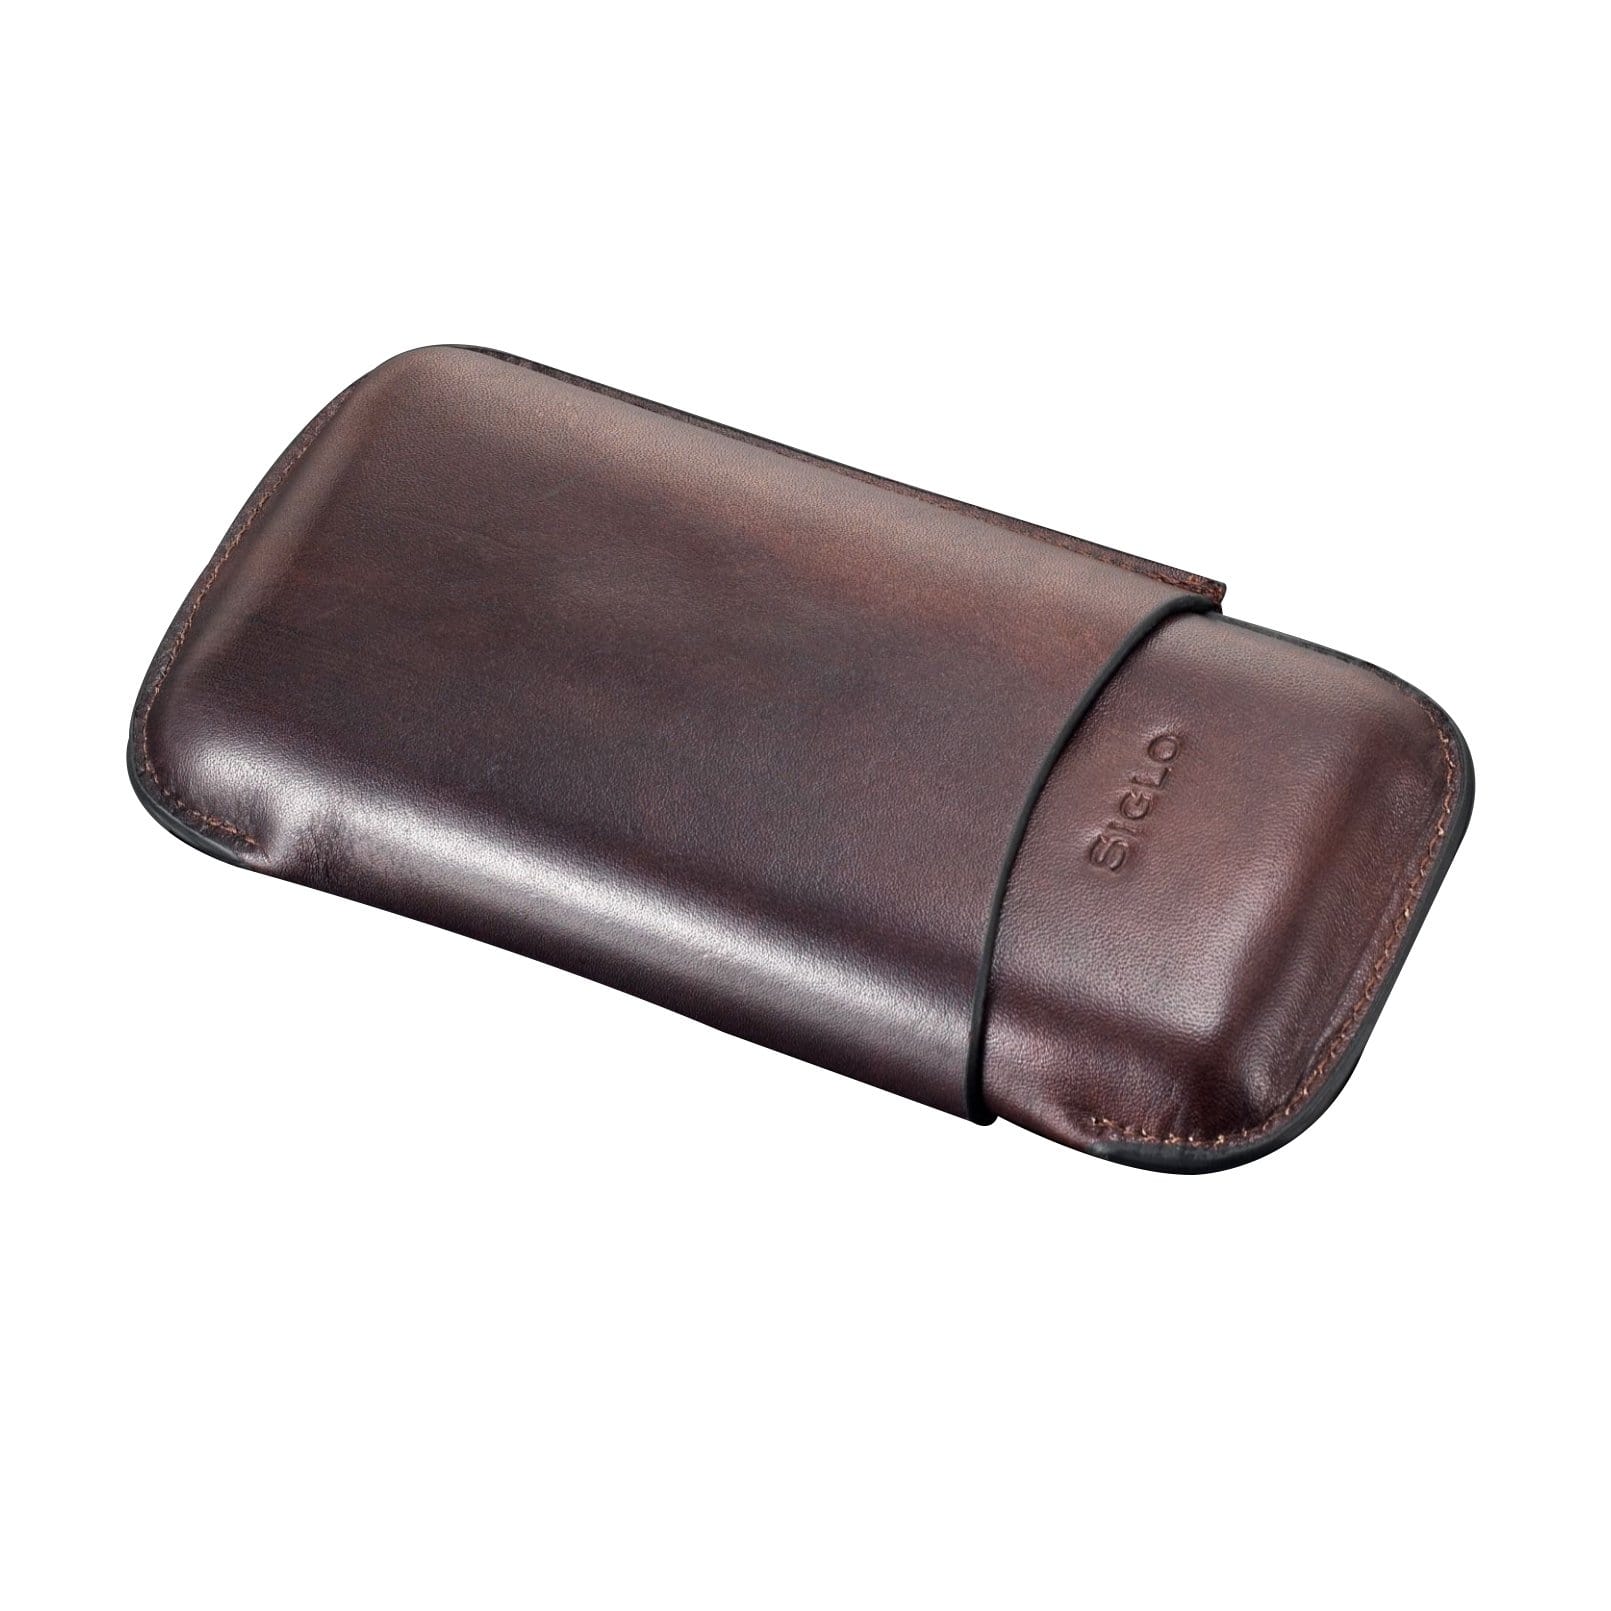 SIGLO ACCESSORIES BROWN VINTAGE BROWN LEATHER CASE